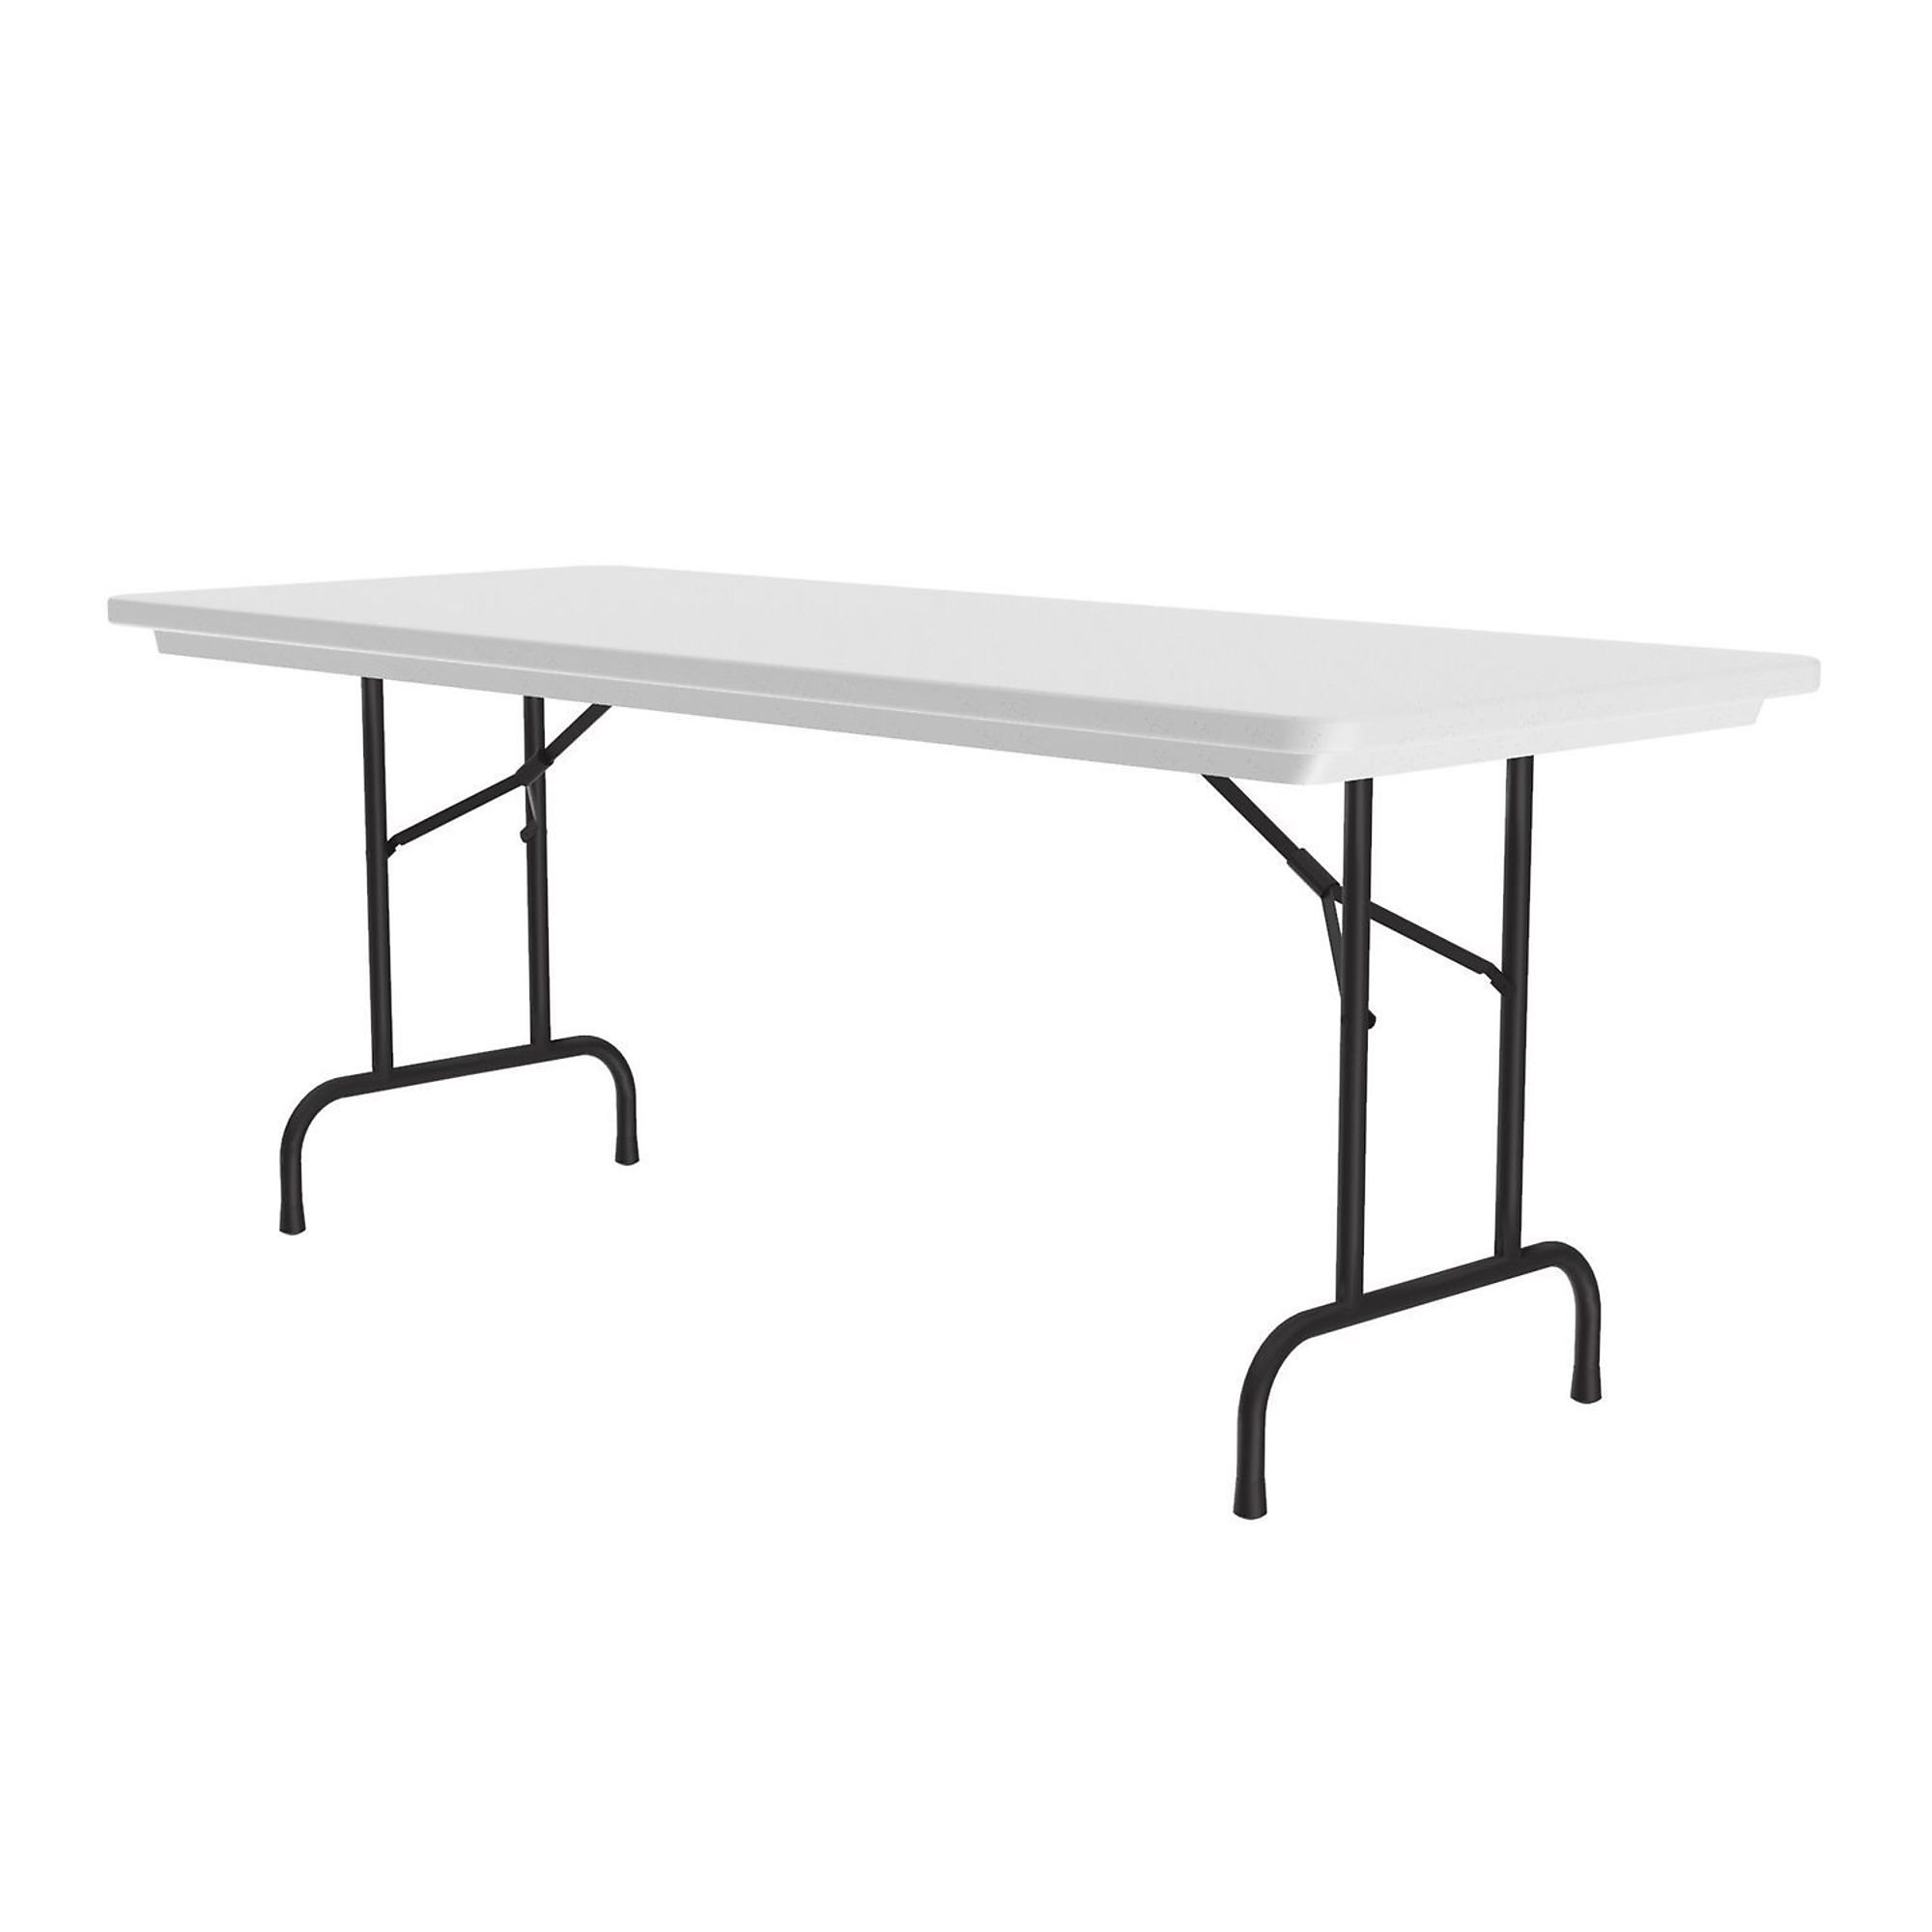 Correll, Plastic Folding Table, Gray Granite Top, 30x96, Height 29 in, Width 30 in, Length 96 in, Model R3096-23